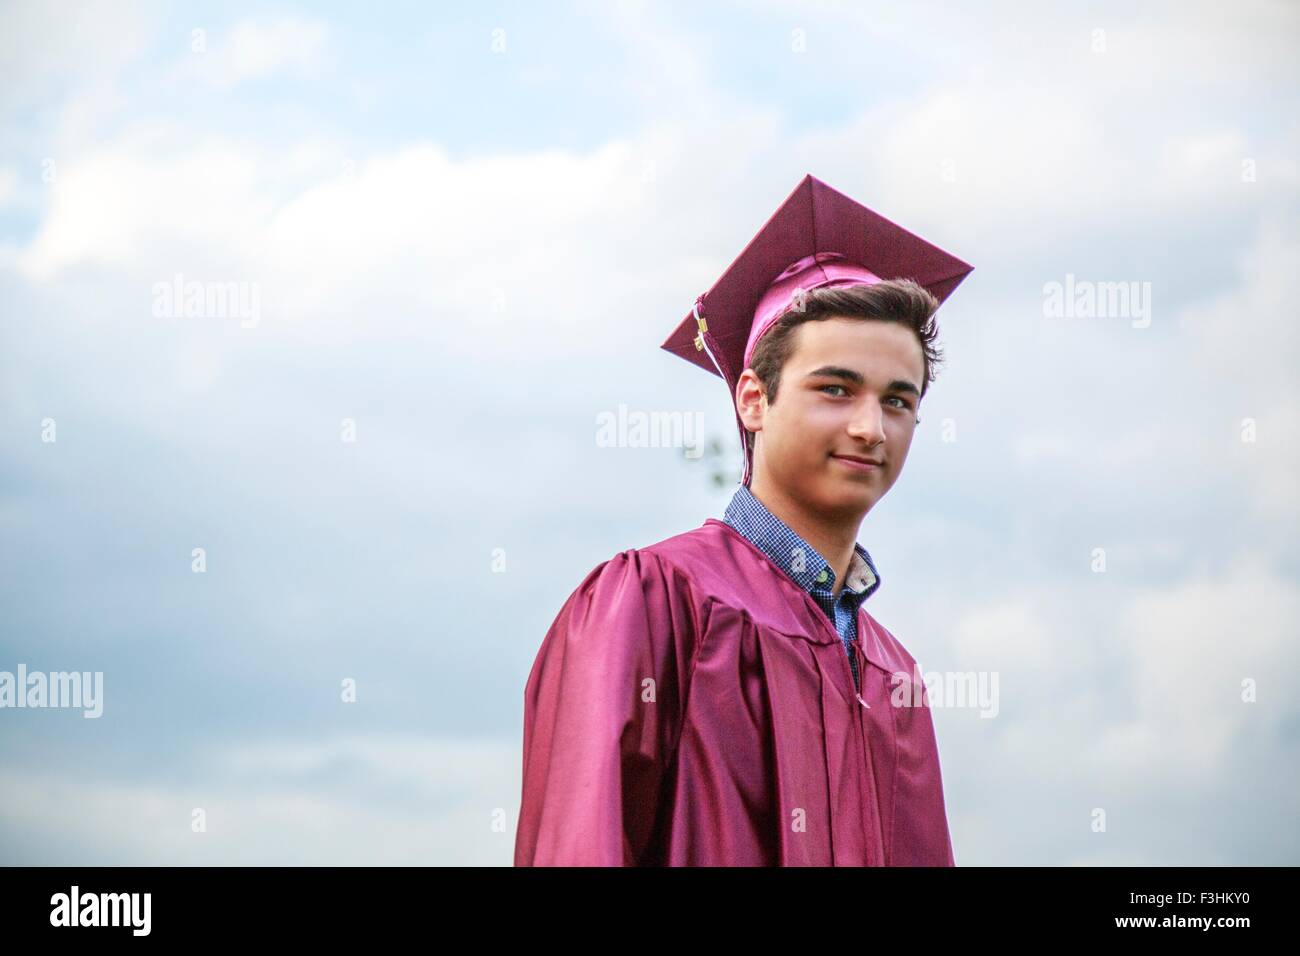 Portrait of young man at graduation ceremony Stock Photo